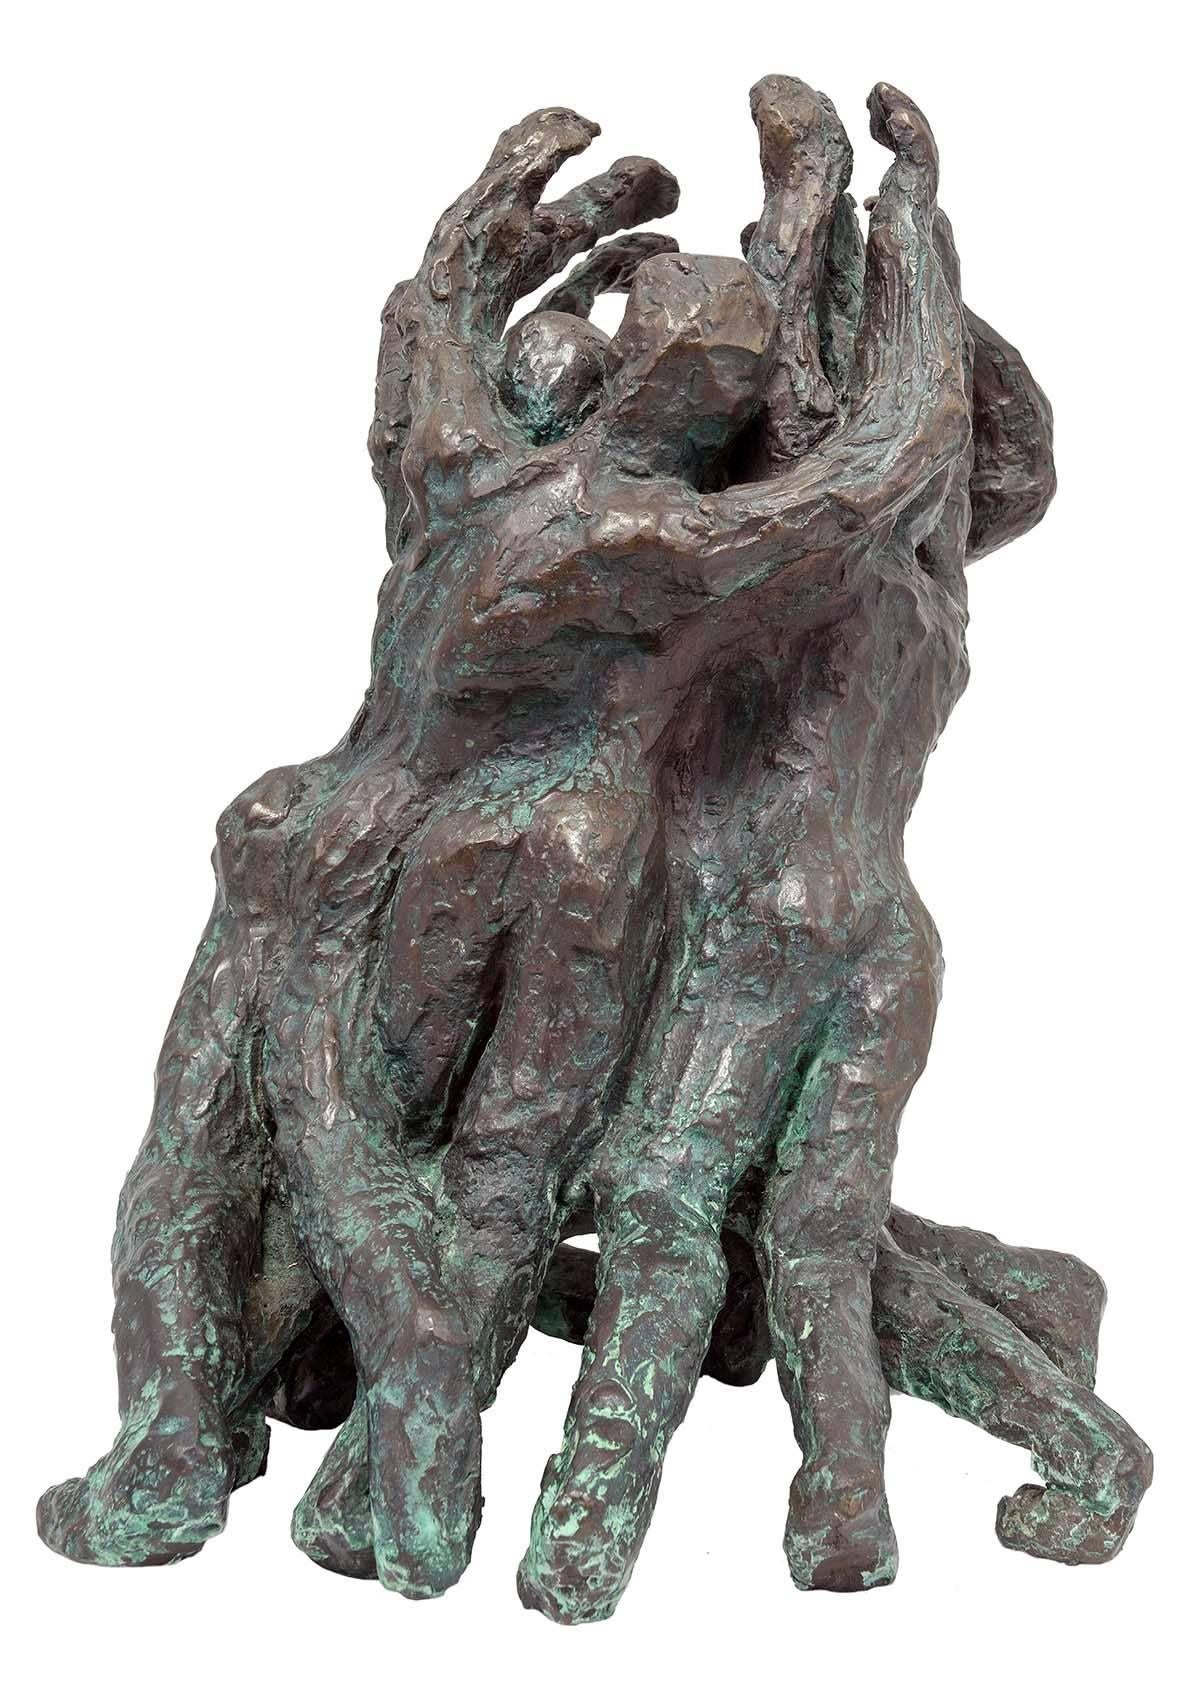 This triumphal solid bronze sculpture is a powerfull reminder of mankinds resilience in the face of hardship and a testament to the human spirit.